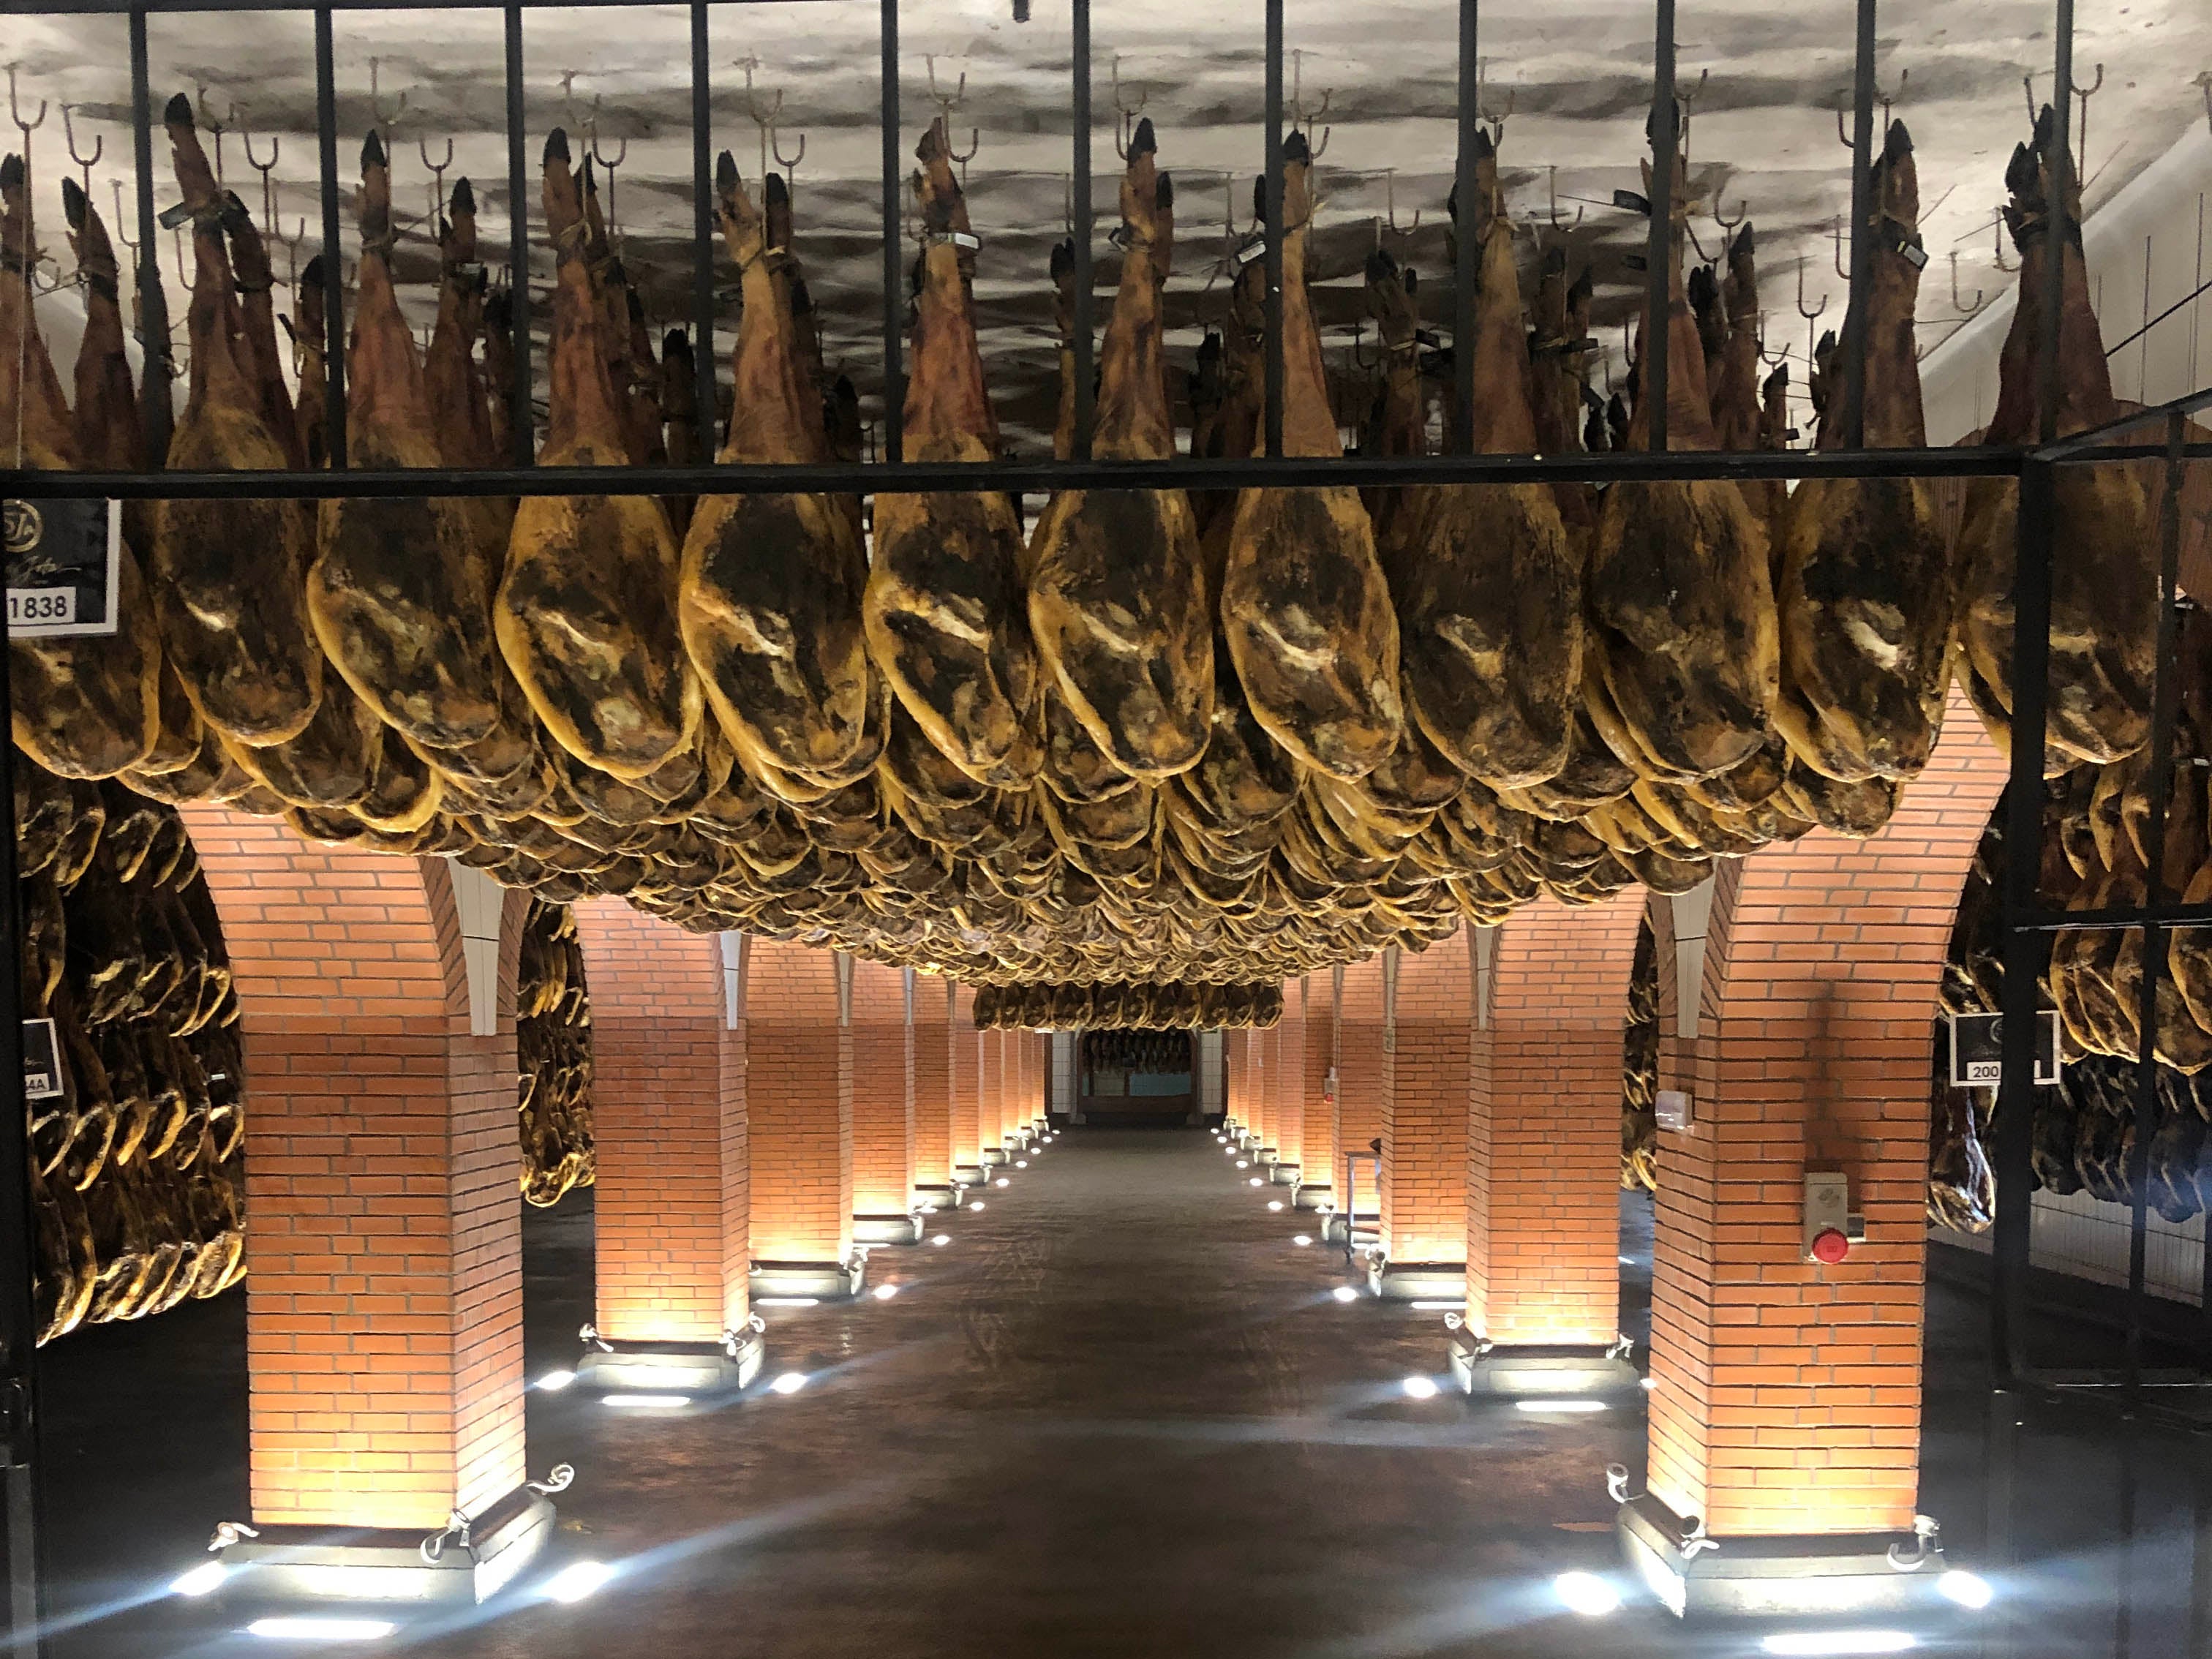 At any one time, there’s thousands of hams curing in the cellars